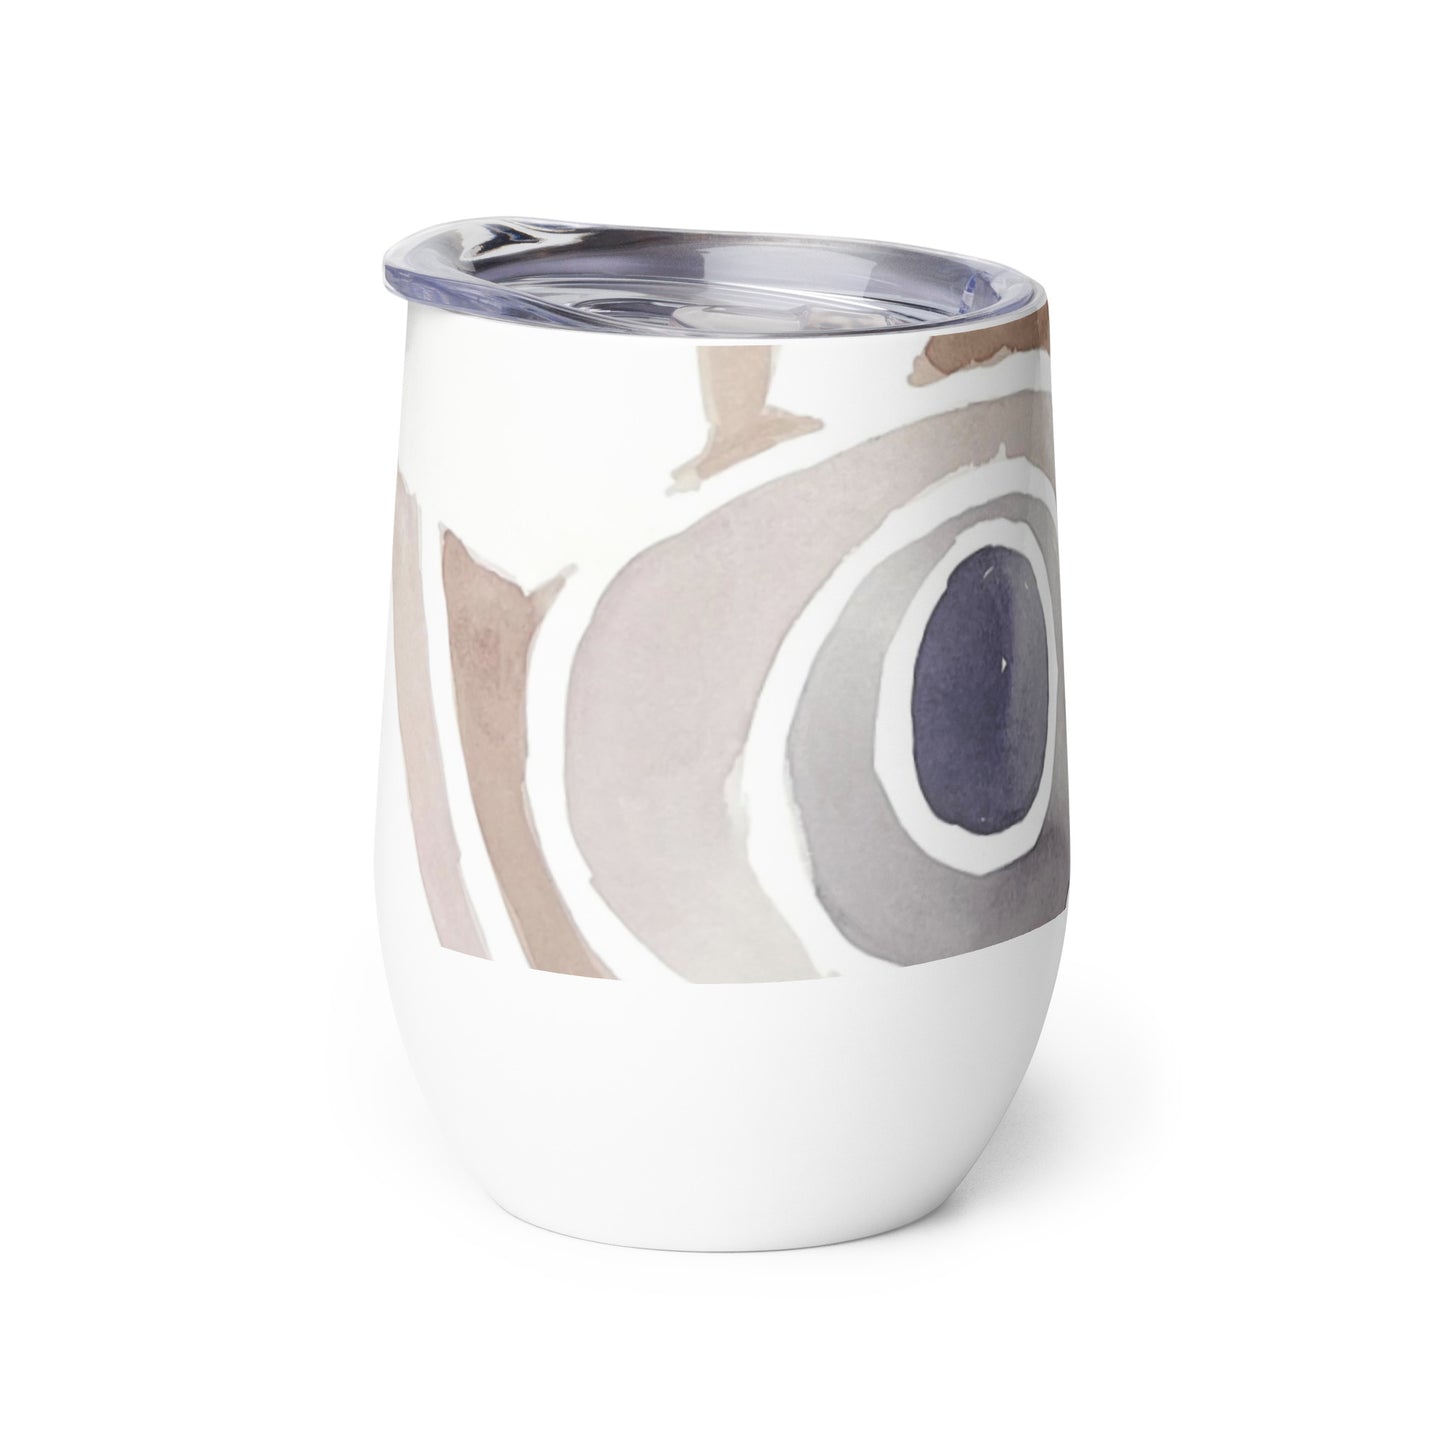 Body of Wine Collection: South African Swirl Wine tumbler